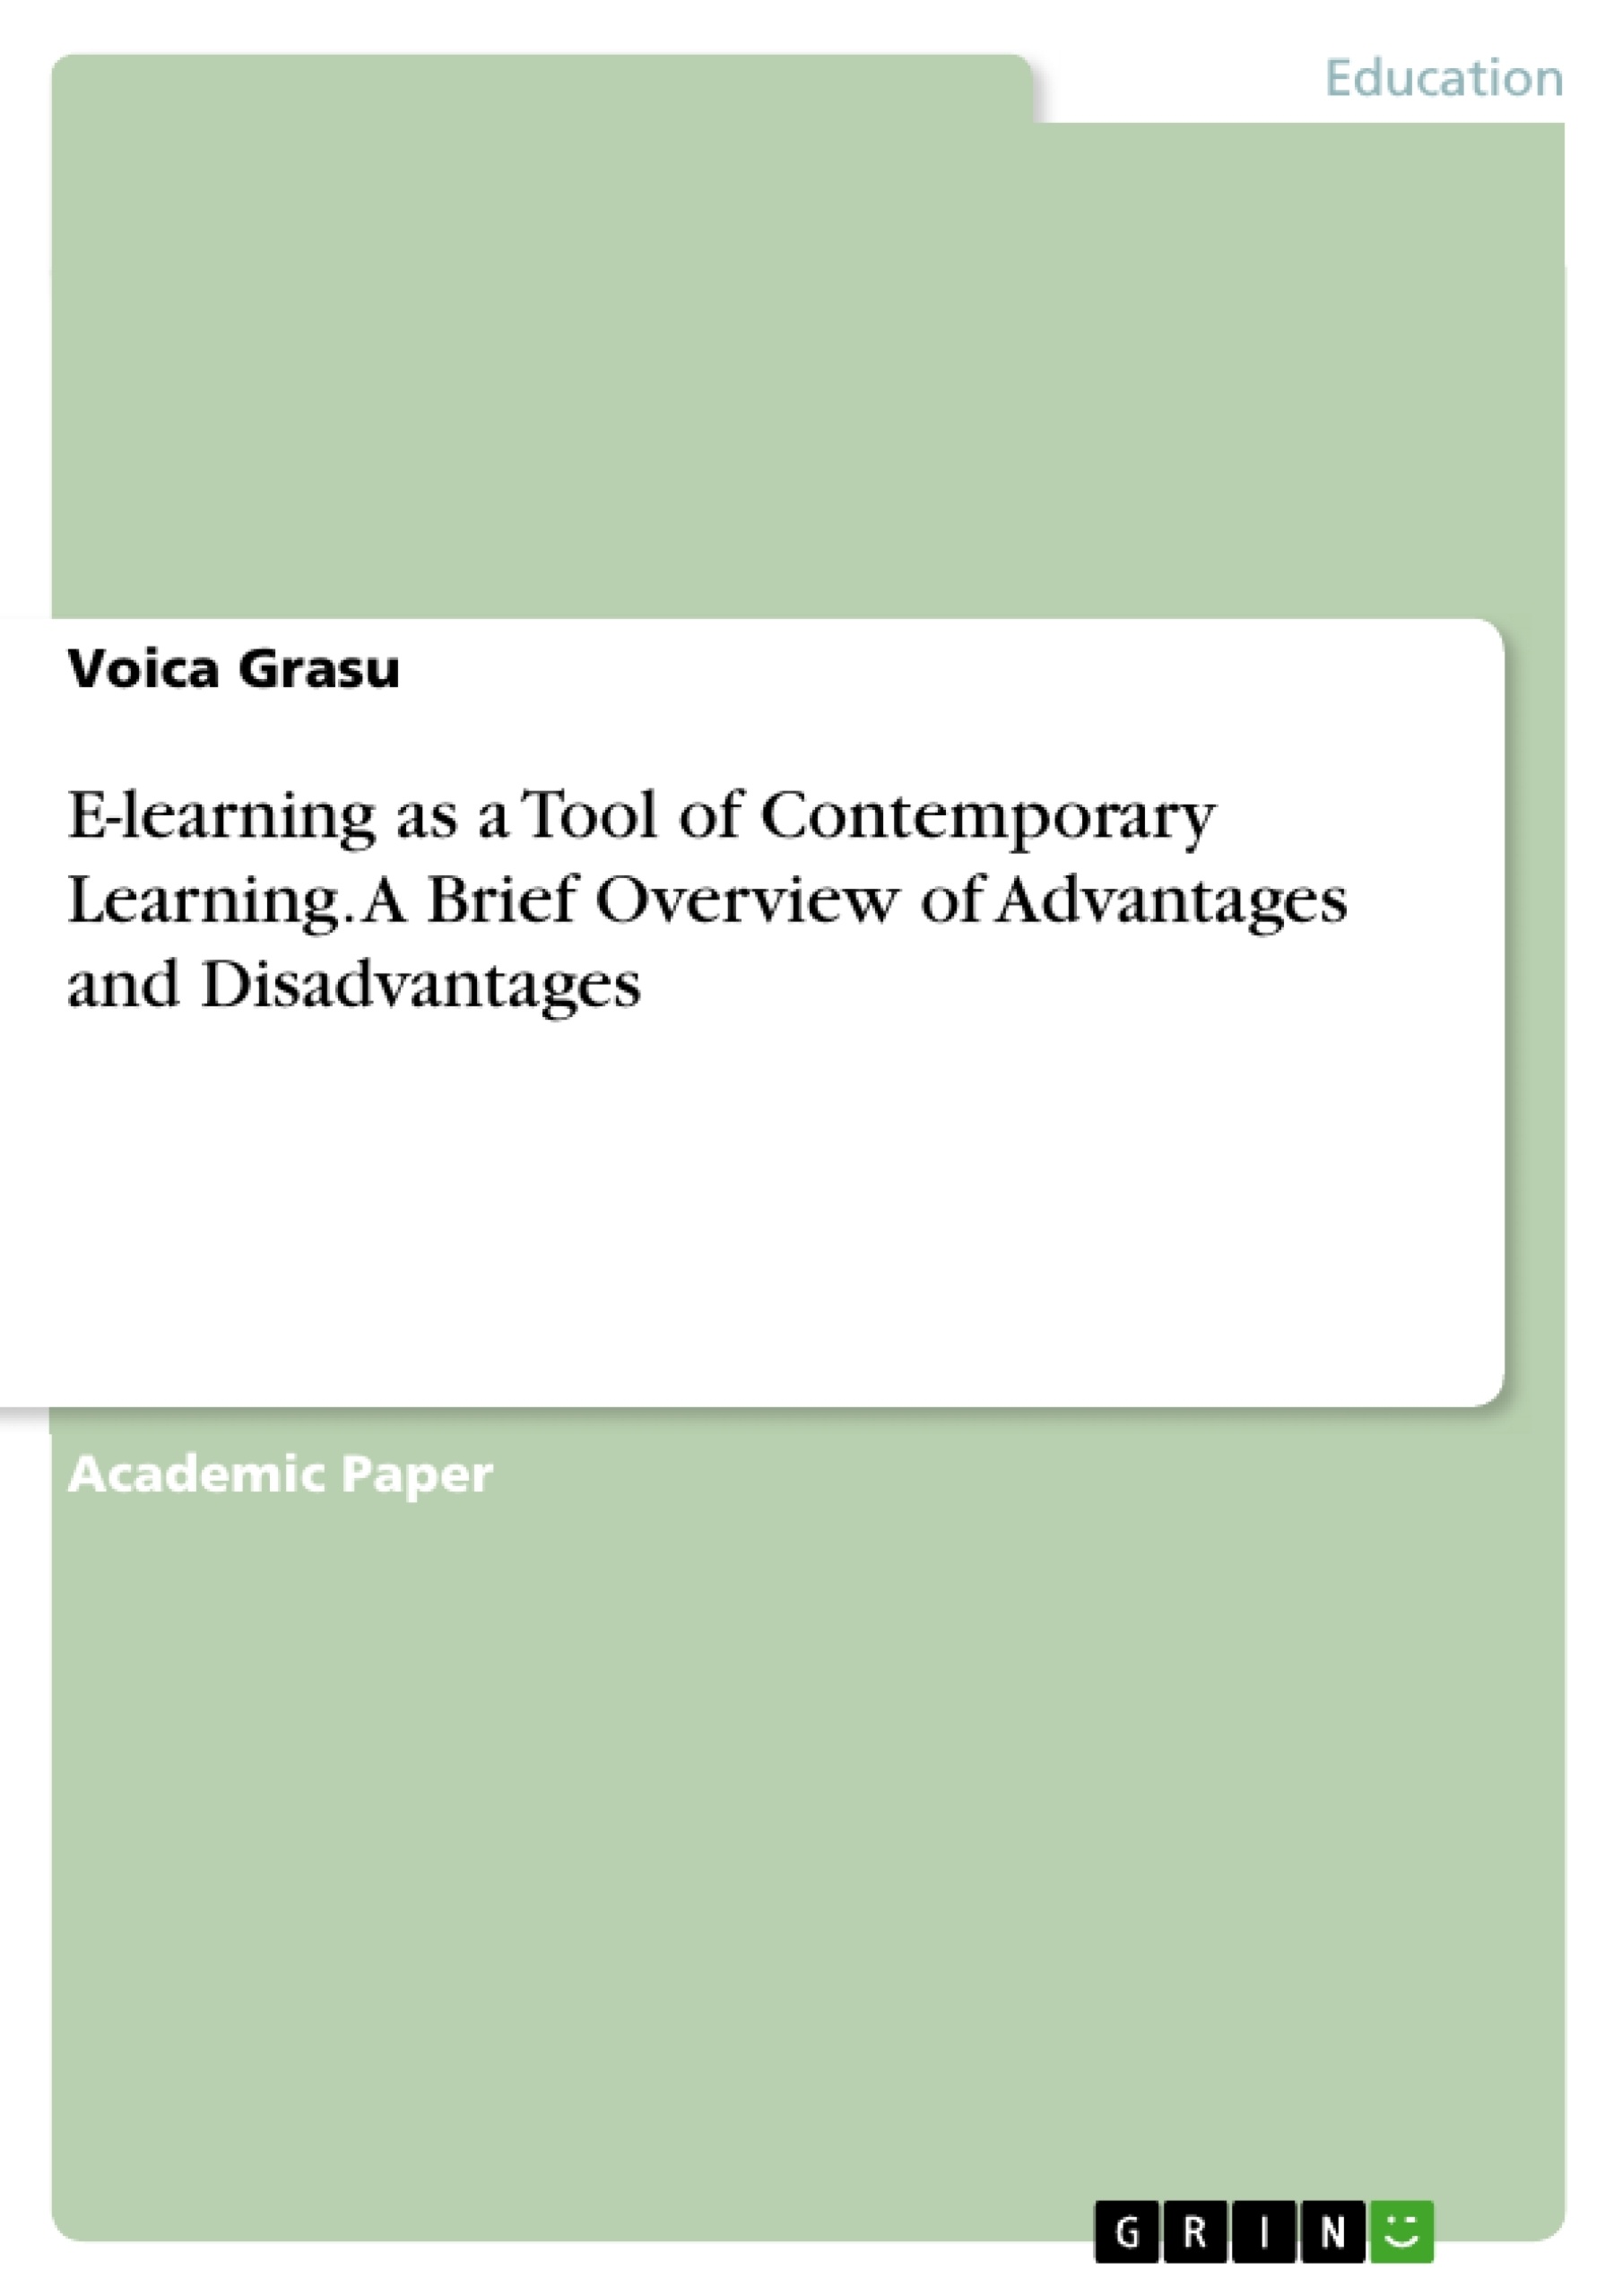 Title: E-learning as a Tool of Contemporary Learning. A Brief Overview of Advantages and Disadvantages